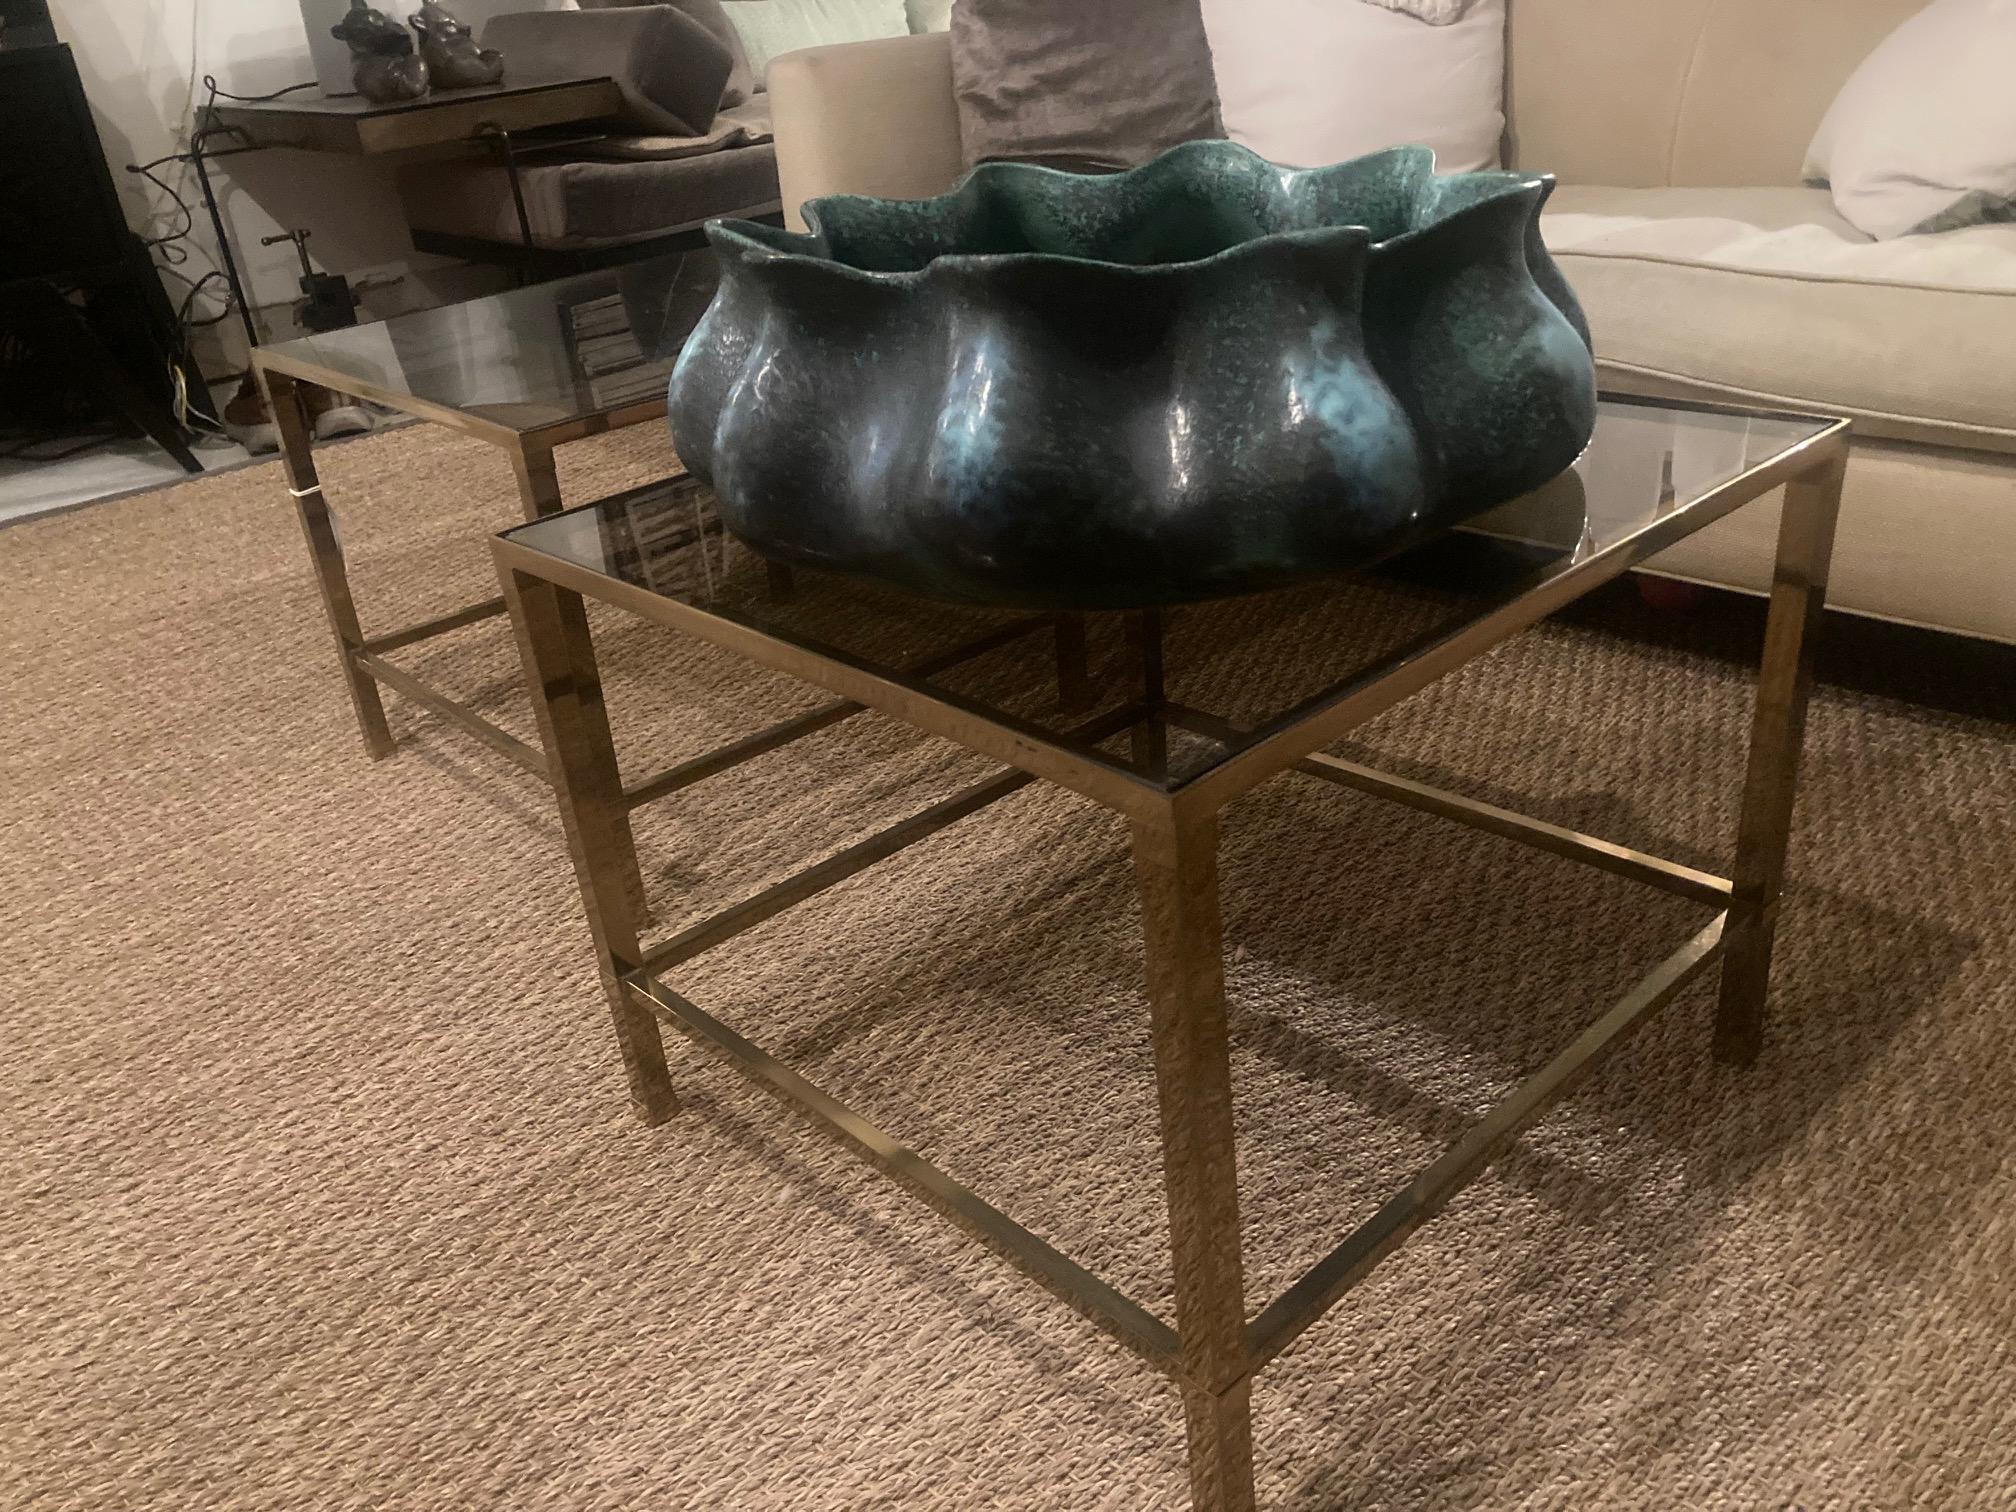 Vintage Modern brass & bronze glass side tables. 

Petite, modern glass side table with bronze glass. These side tables would be a wonderful addition for a seating area. 
Wear commensurate with age and use. Glass has a chipped edge (additional cost